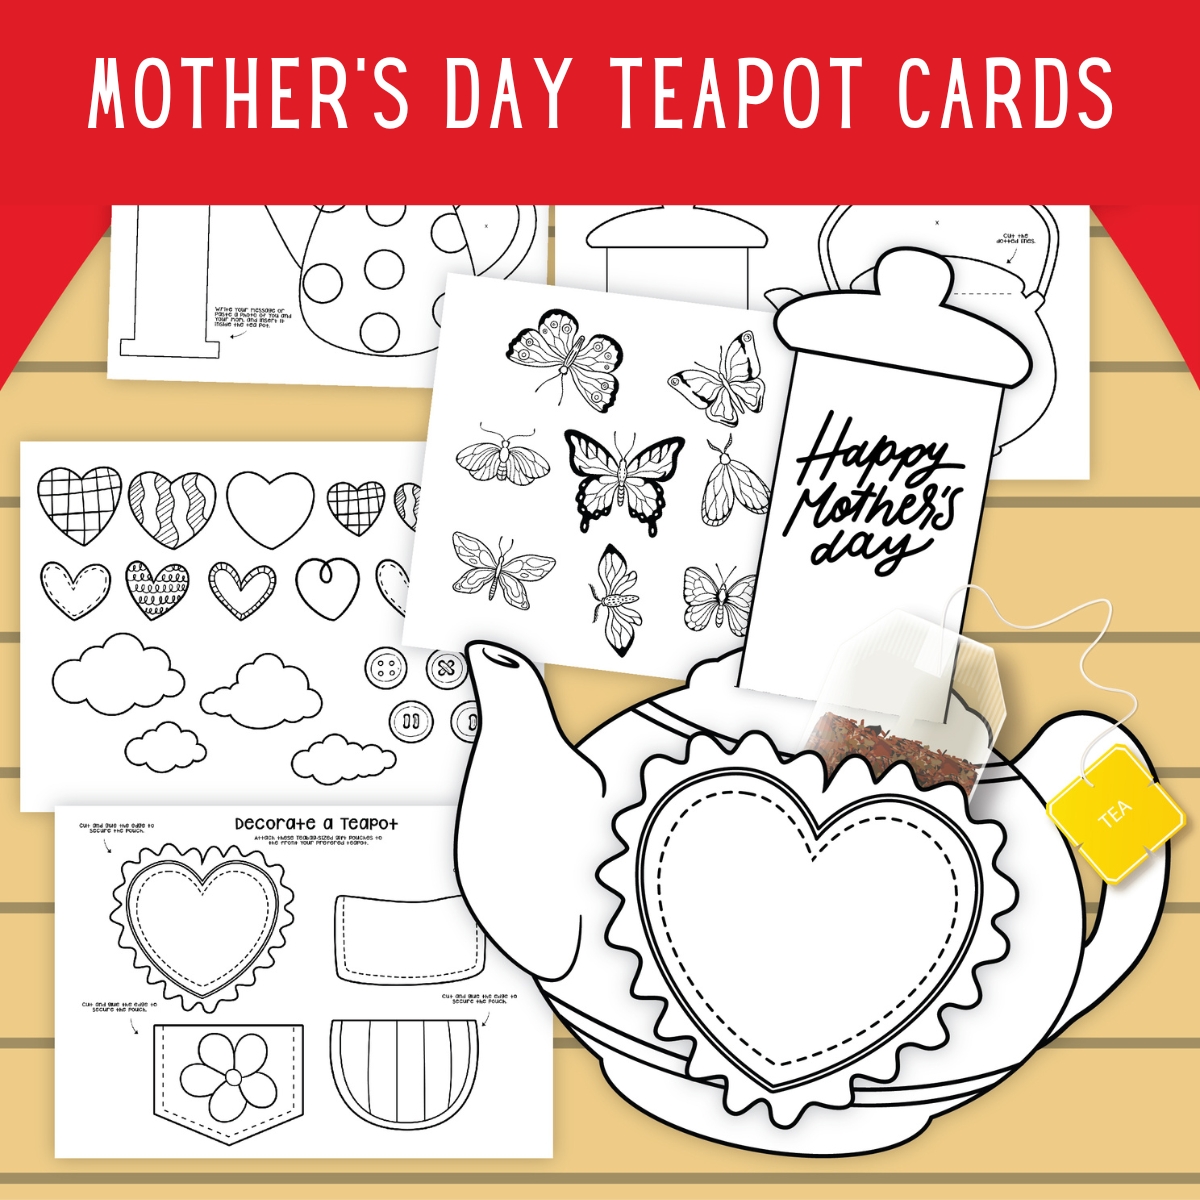 Mother's Day Teapot Cards